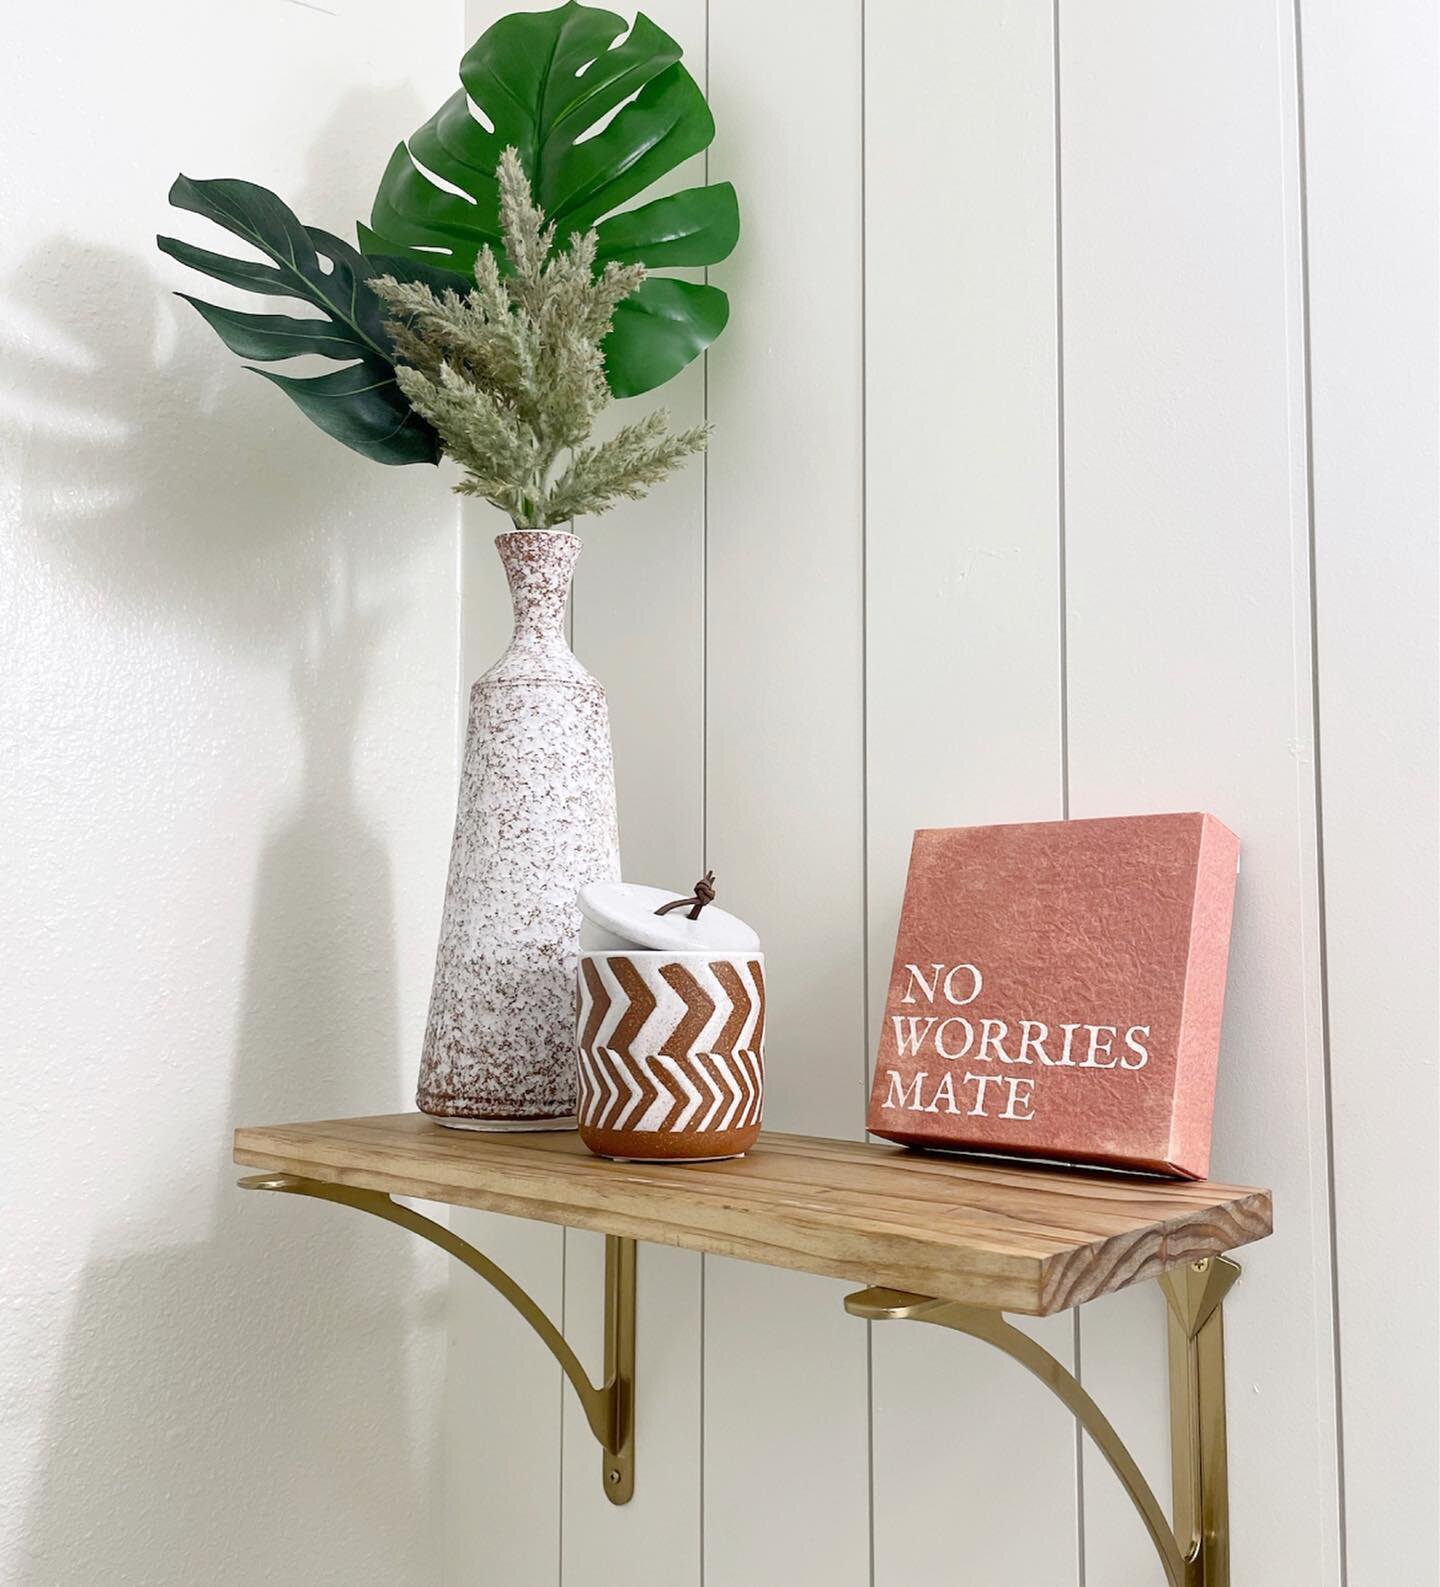 Looking for some quick beautiful shelves? &ldquo;No worries mate&rdquo;. Try this! 

&bull; beautiful brass brackets 
&bull; piece of stainable wood 
&bull; special walnut stain 
&bull; some cute decor on top of course ;) 

Swipe -&gt; to see where i